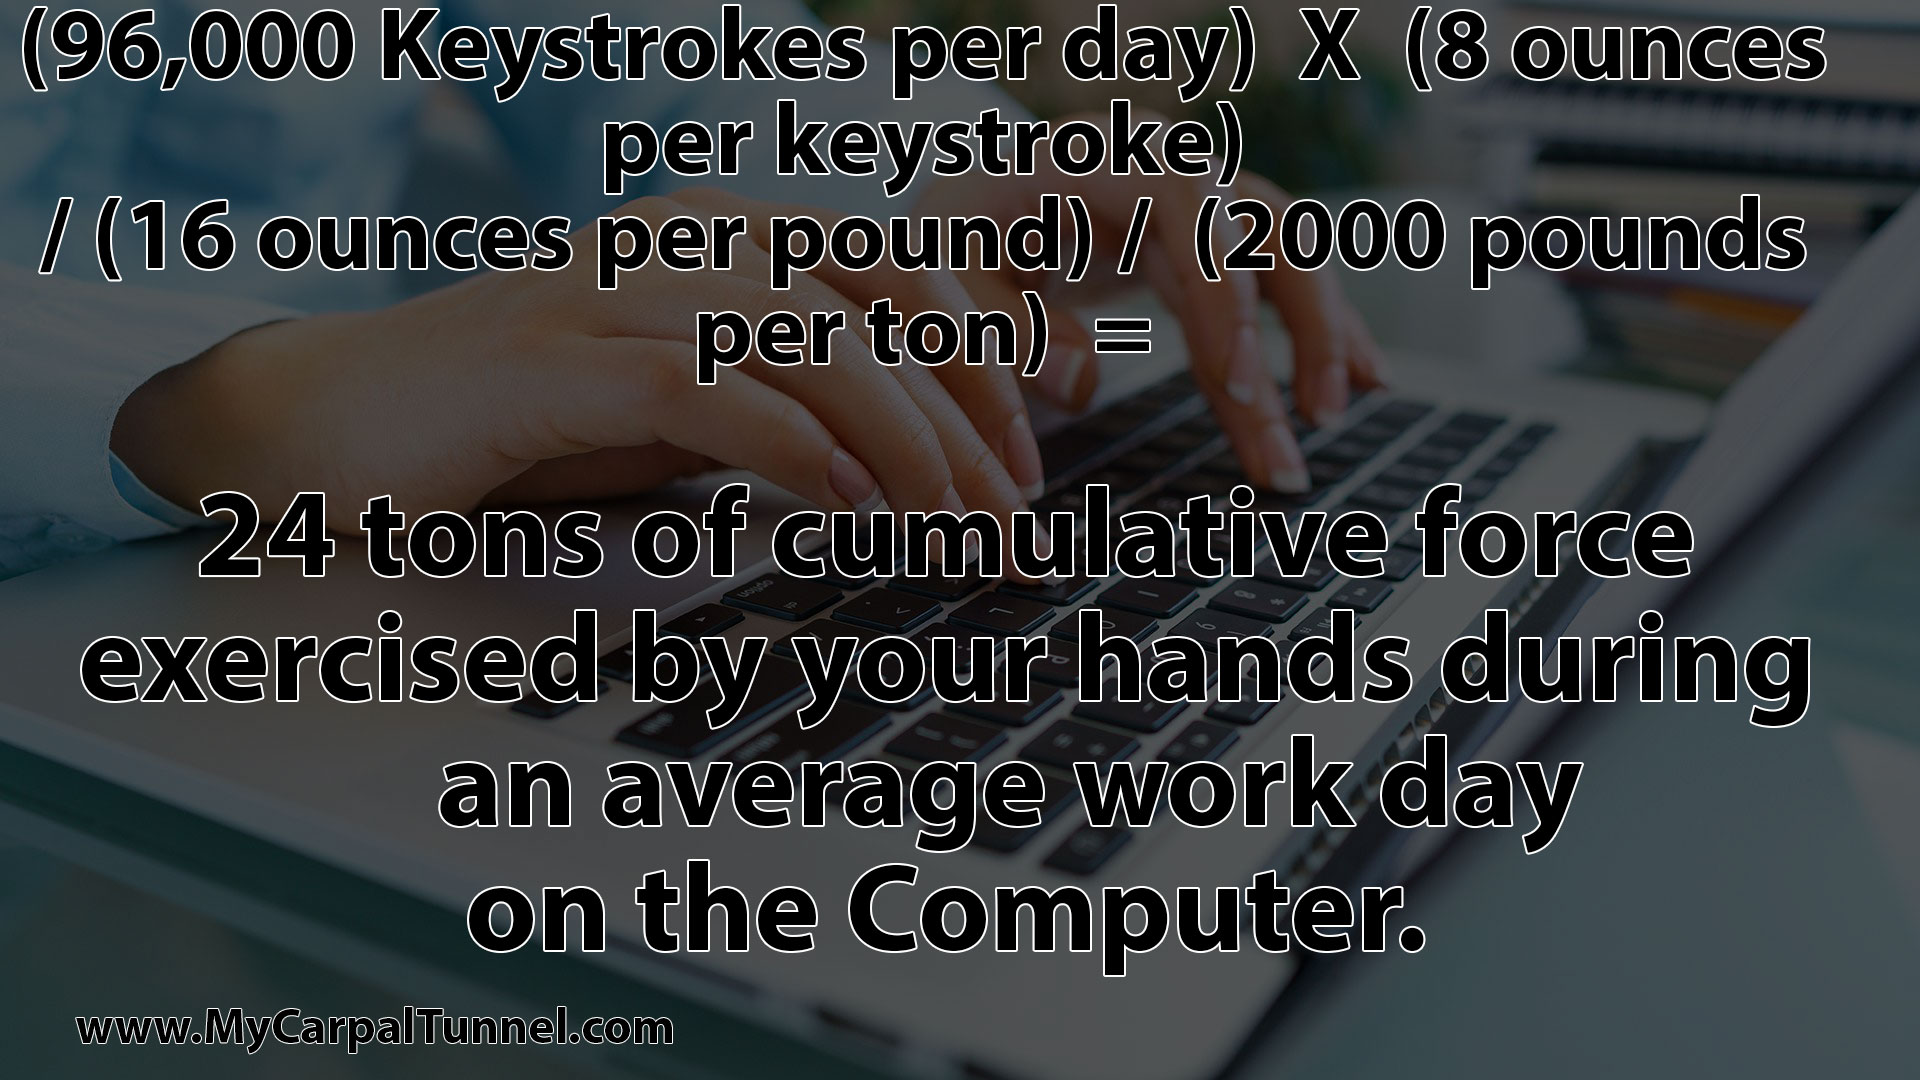 the pressure of constant computer use can increase your chances of carpal tunnel syndrome